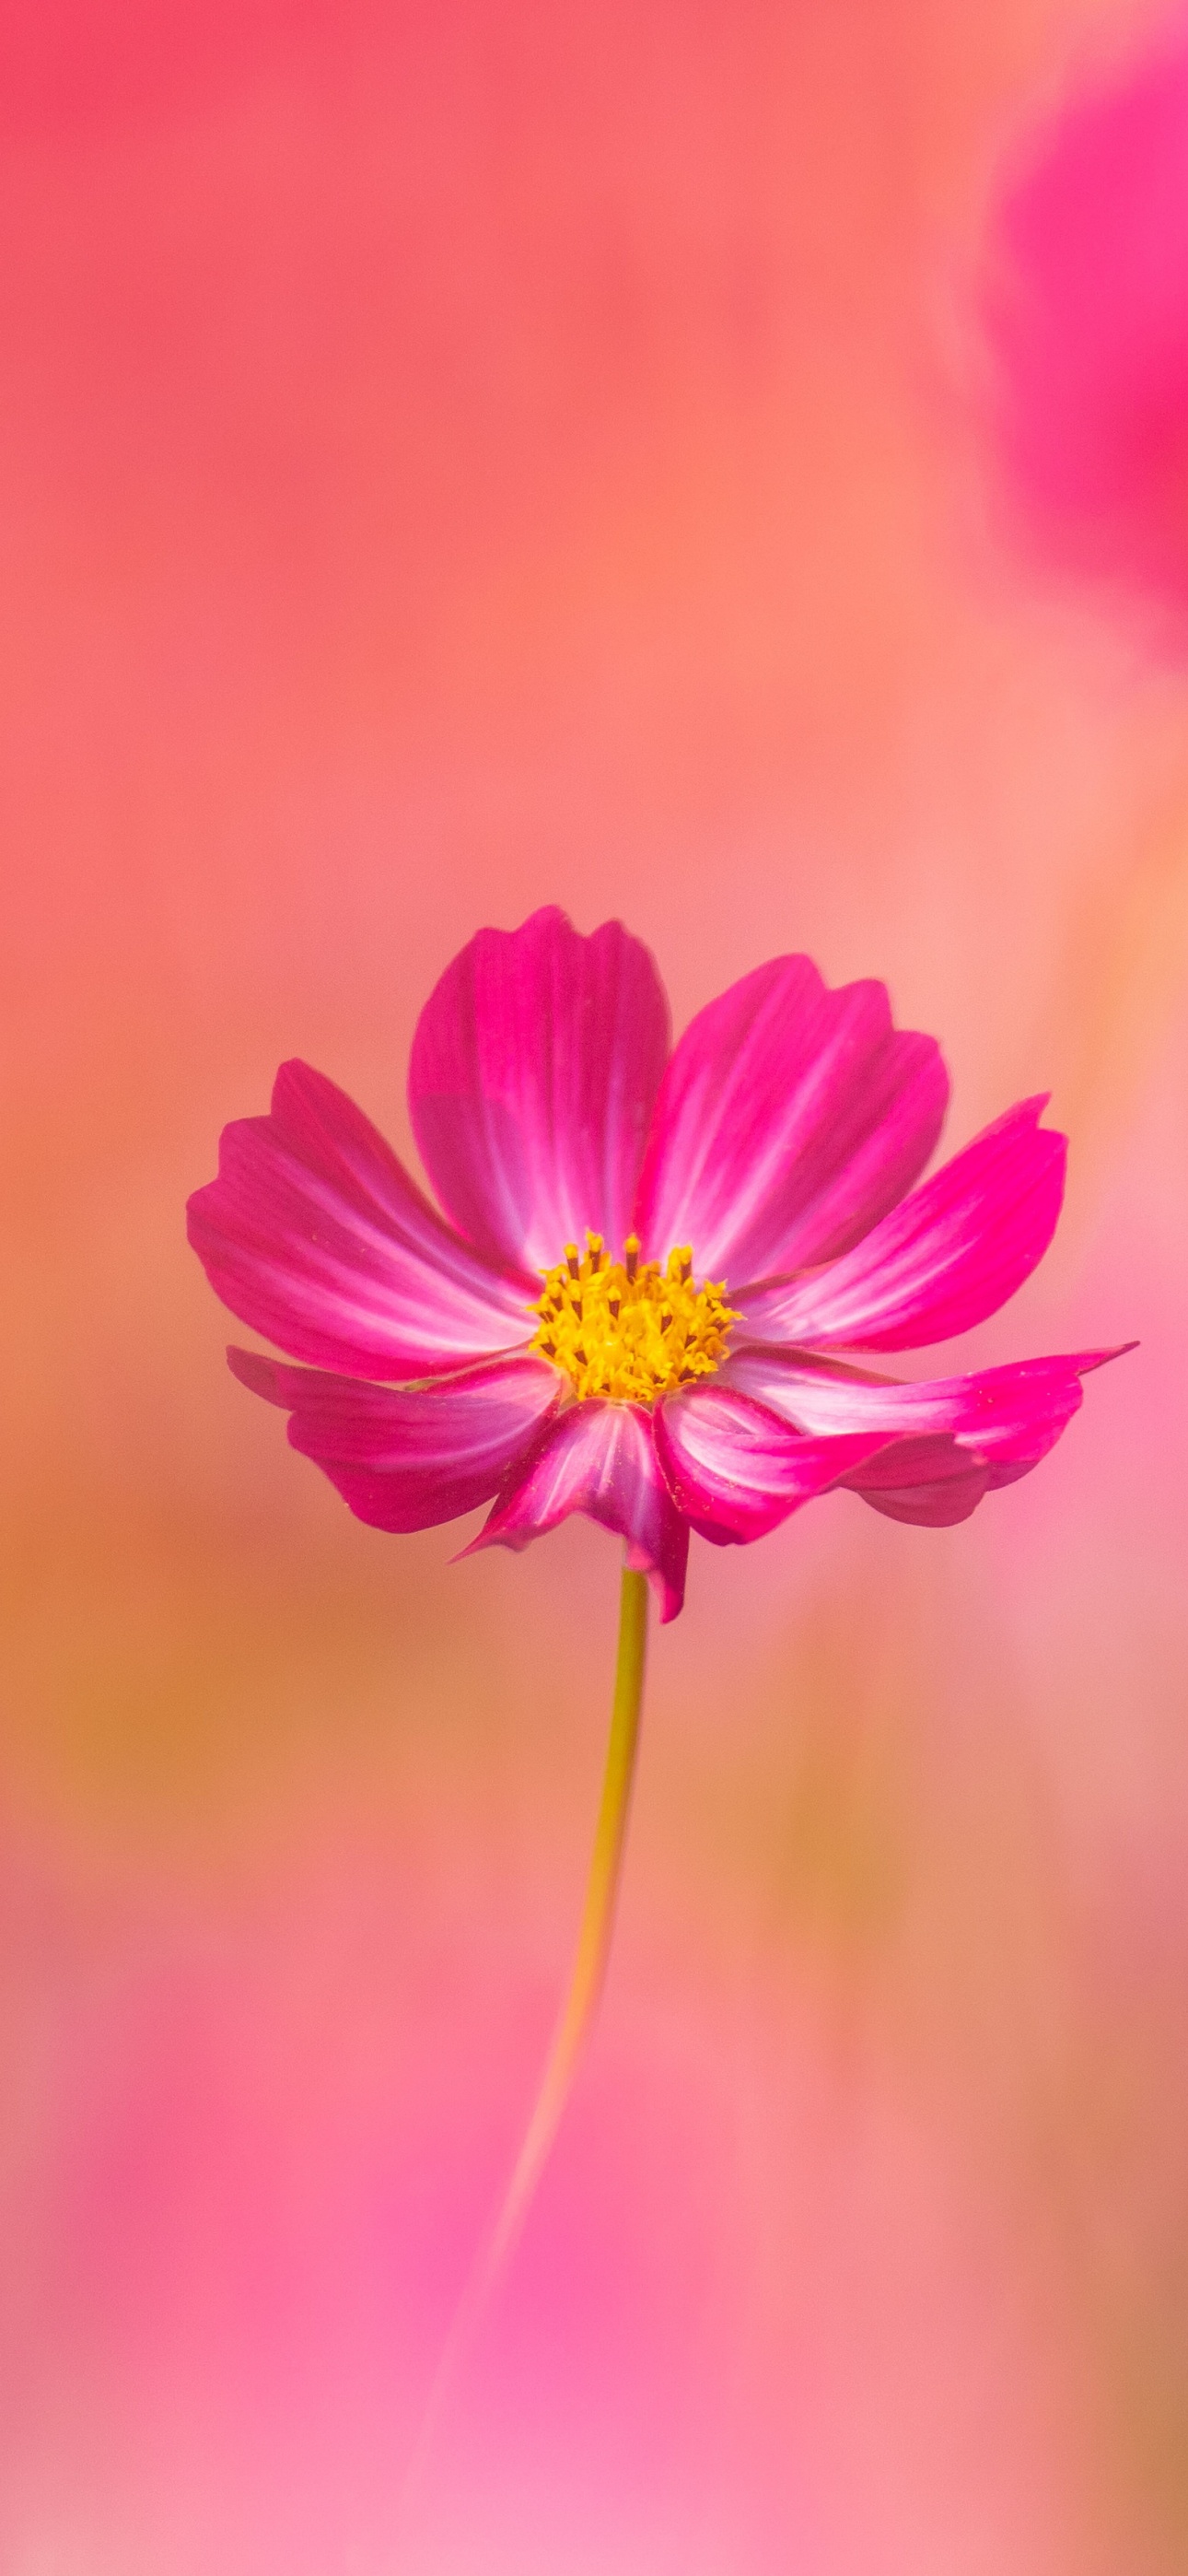 HDR flower wallpapers for iPhone